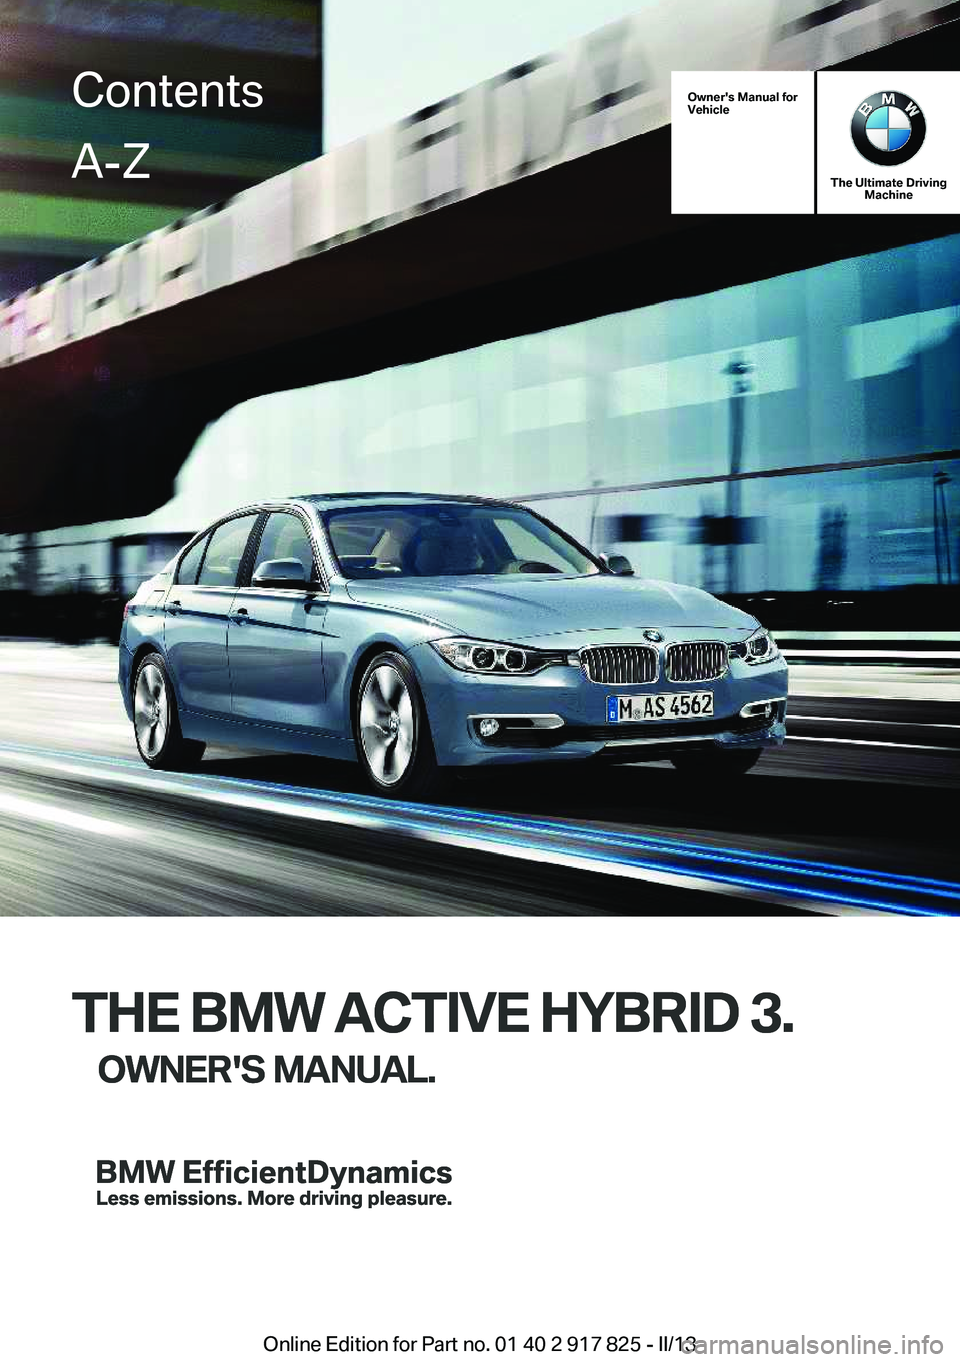 BMW ACTIVEHYBRID3 2013  Owners Manual Owner's Manual for
Vehicle
THE BMW ACTIVE HYBRID 3.
OWNER'S MANUAL.
The Ultimate Driving Machine
THE BMW ACTIVE HYBRID 3.
OWNER'S MANUAL.
ContentsA-Z
Online Edition for Part no. 01 40 2 91